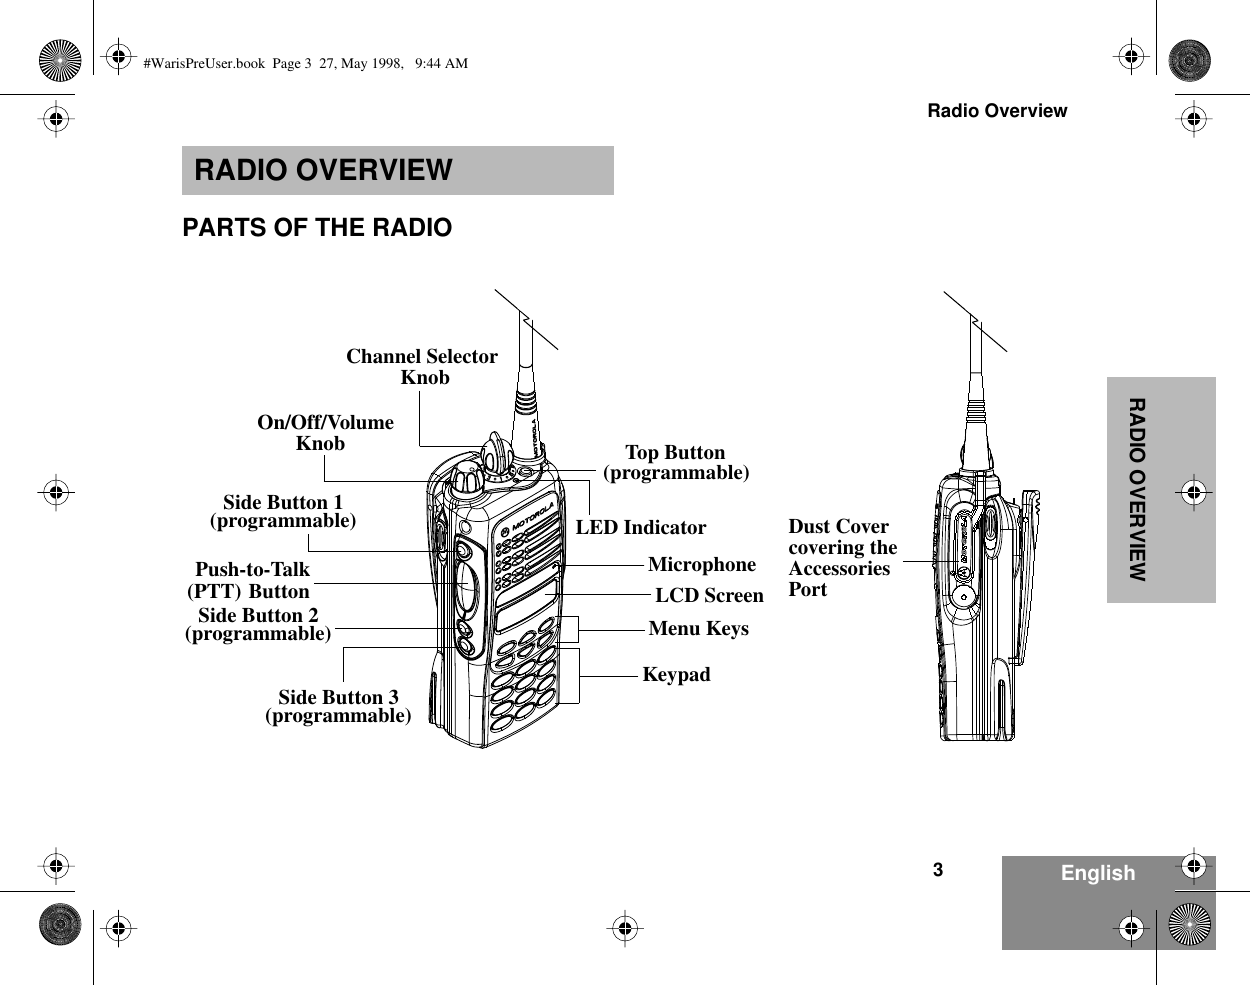  3Radio Overview EnglishRADIO OVERVIEW RADIO OVERVIEW PARTS OF THE RADIOOn/Off/VolumeKnobChannel SelectorKnobLCD ScreenMicrophoneKeypadMenu KeysTop Button(programmable)(programmable)Side Button 1Push-to-Talk(PTT) ButtonLED Indicator(programmable)Side Button 2(programmable)Side Button 3Dust Covercovering theAccessoriesPort #WarisPreUser.book  Page 3  27, May 1998,   9:44 AM